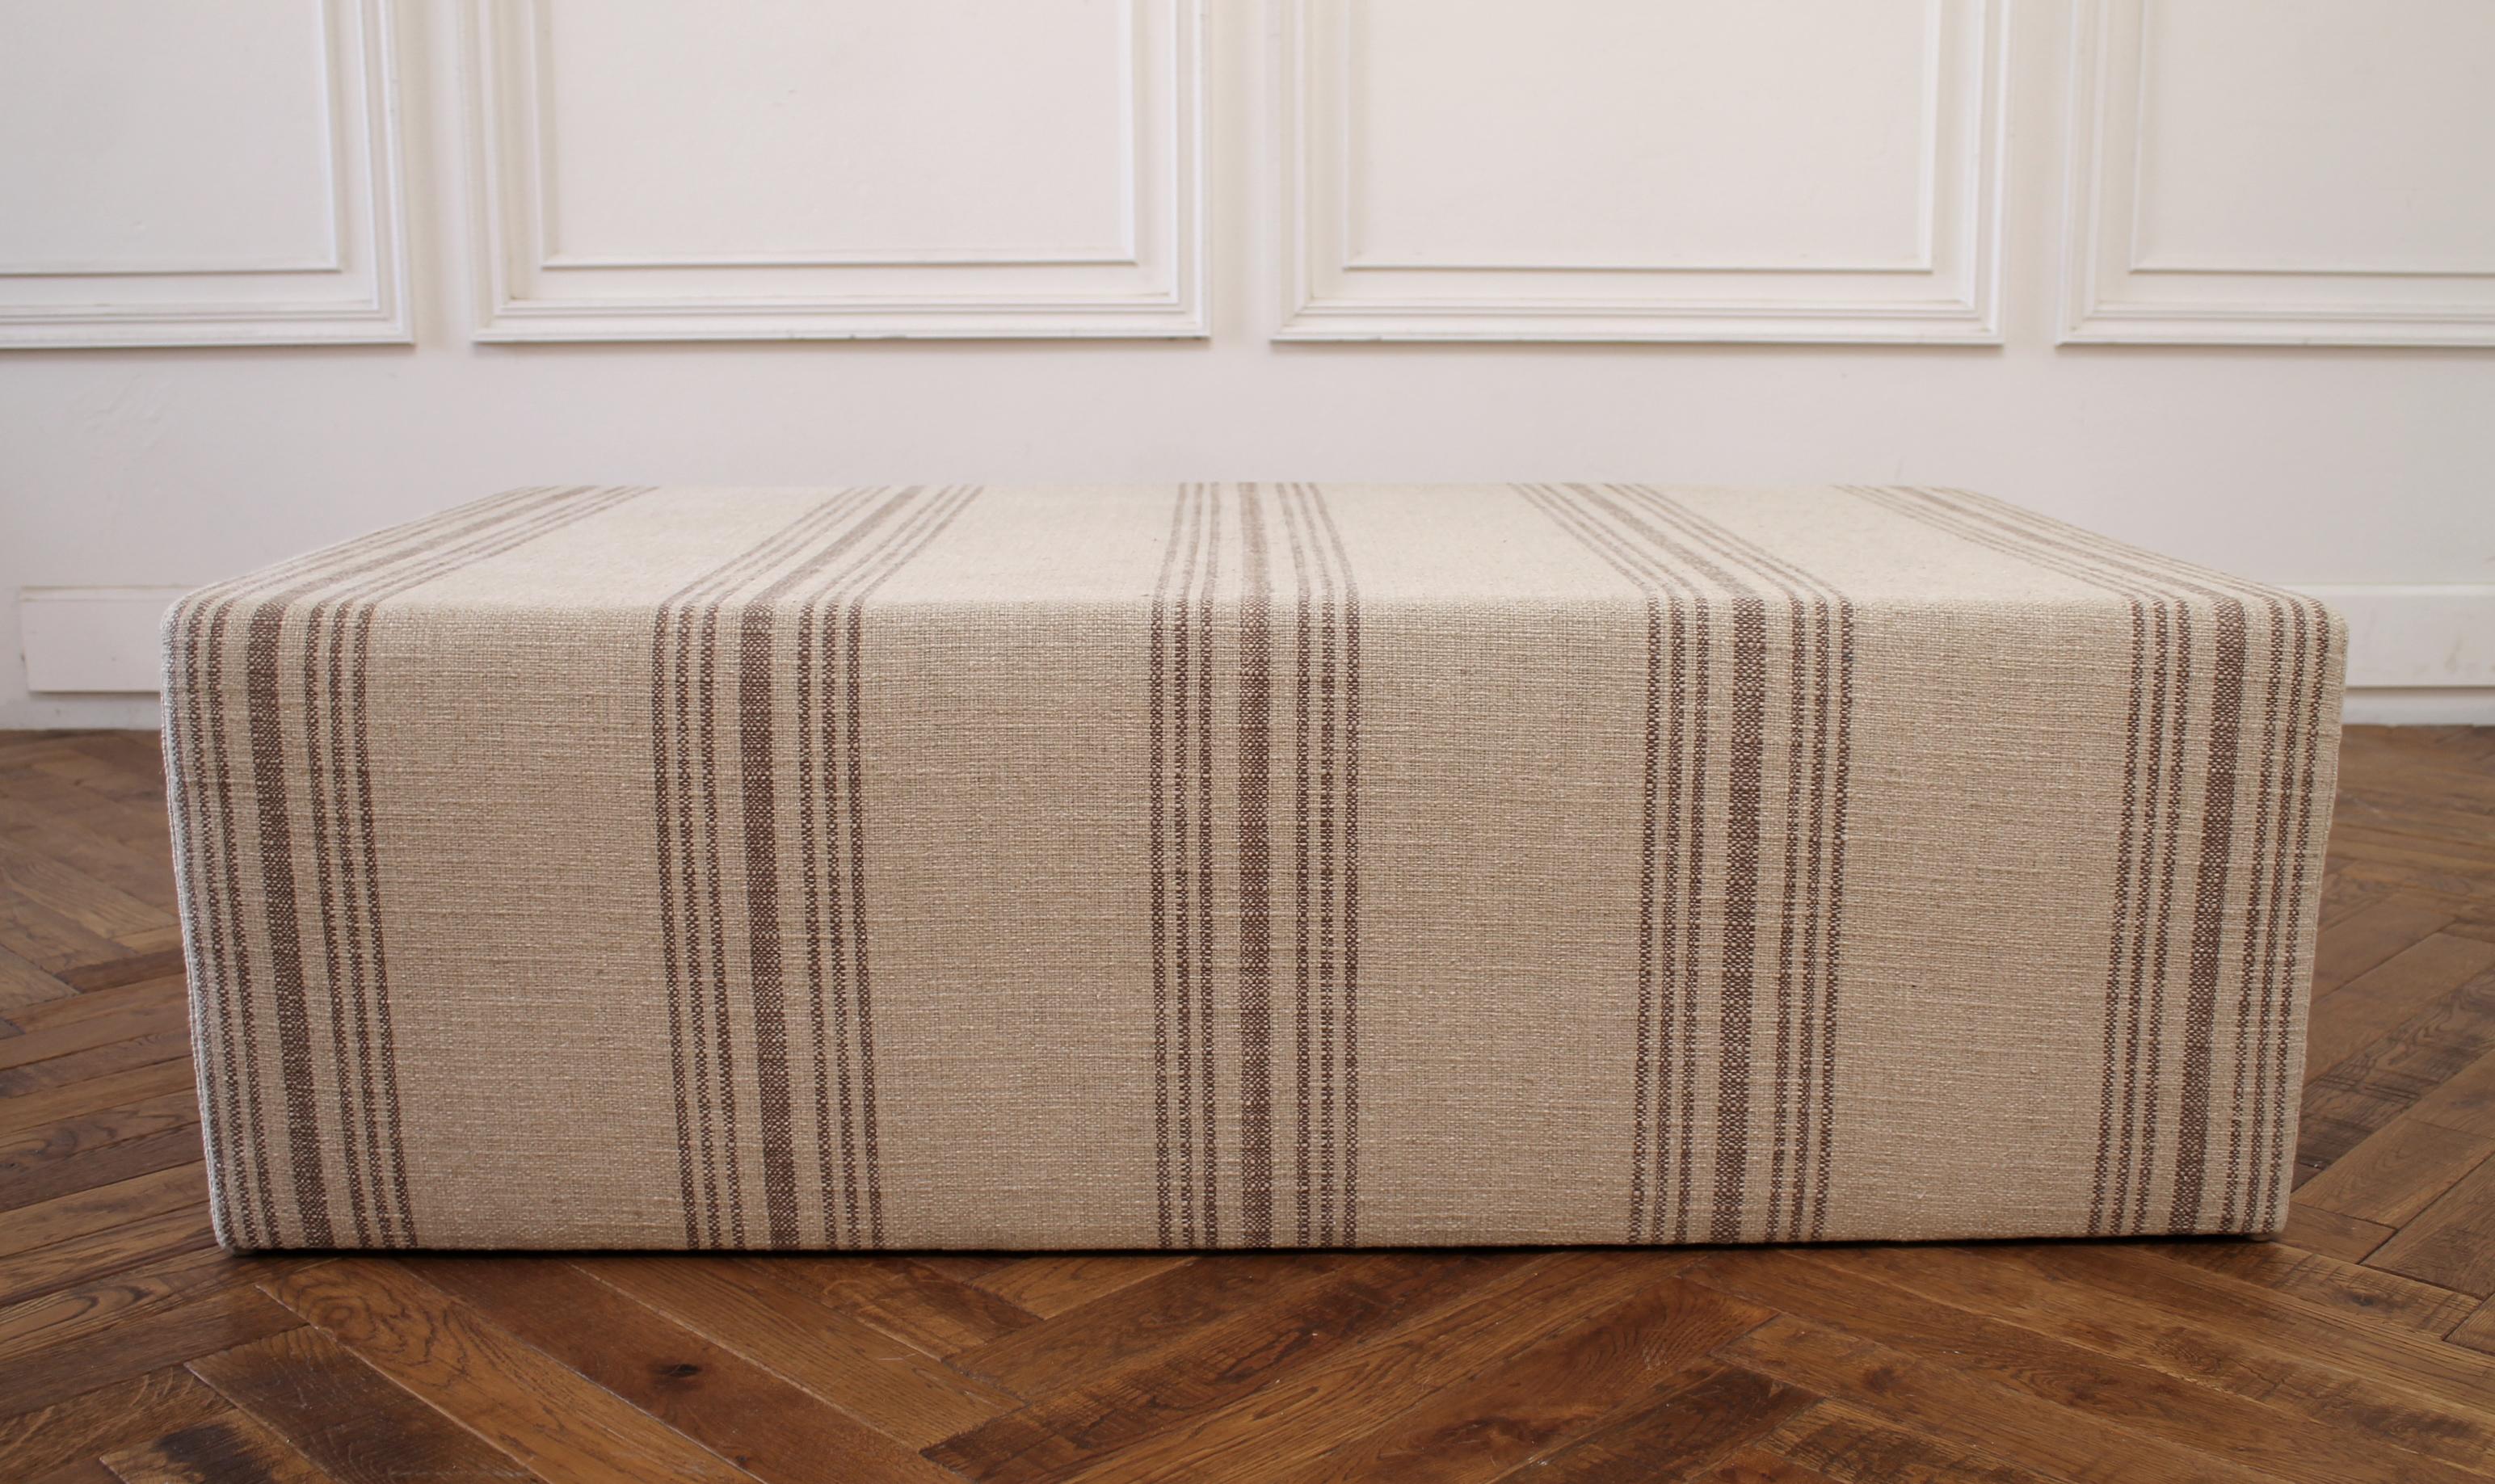 Custom made cube ottoman with natural Grainsack style upholstery made by Full Bloom Cottage this cube ottoman is perfect for use as a coffee table or end of the bed. The fabric is a heavy thick linen with a dark brown multi stripe.
Measures: 51